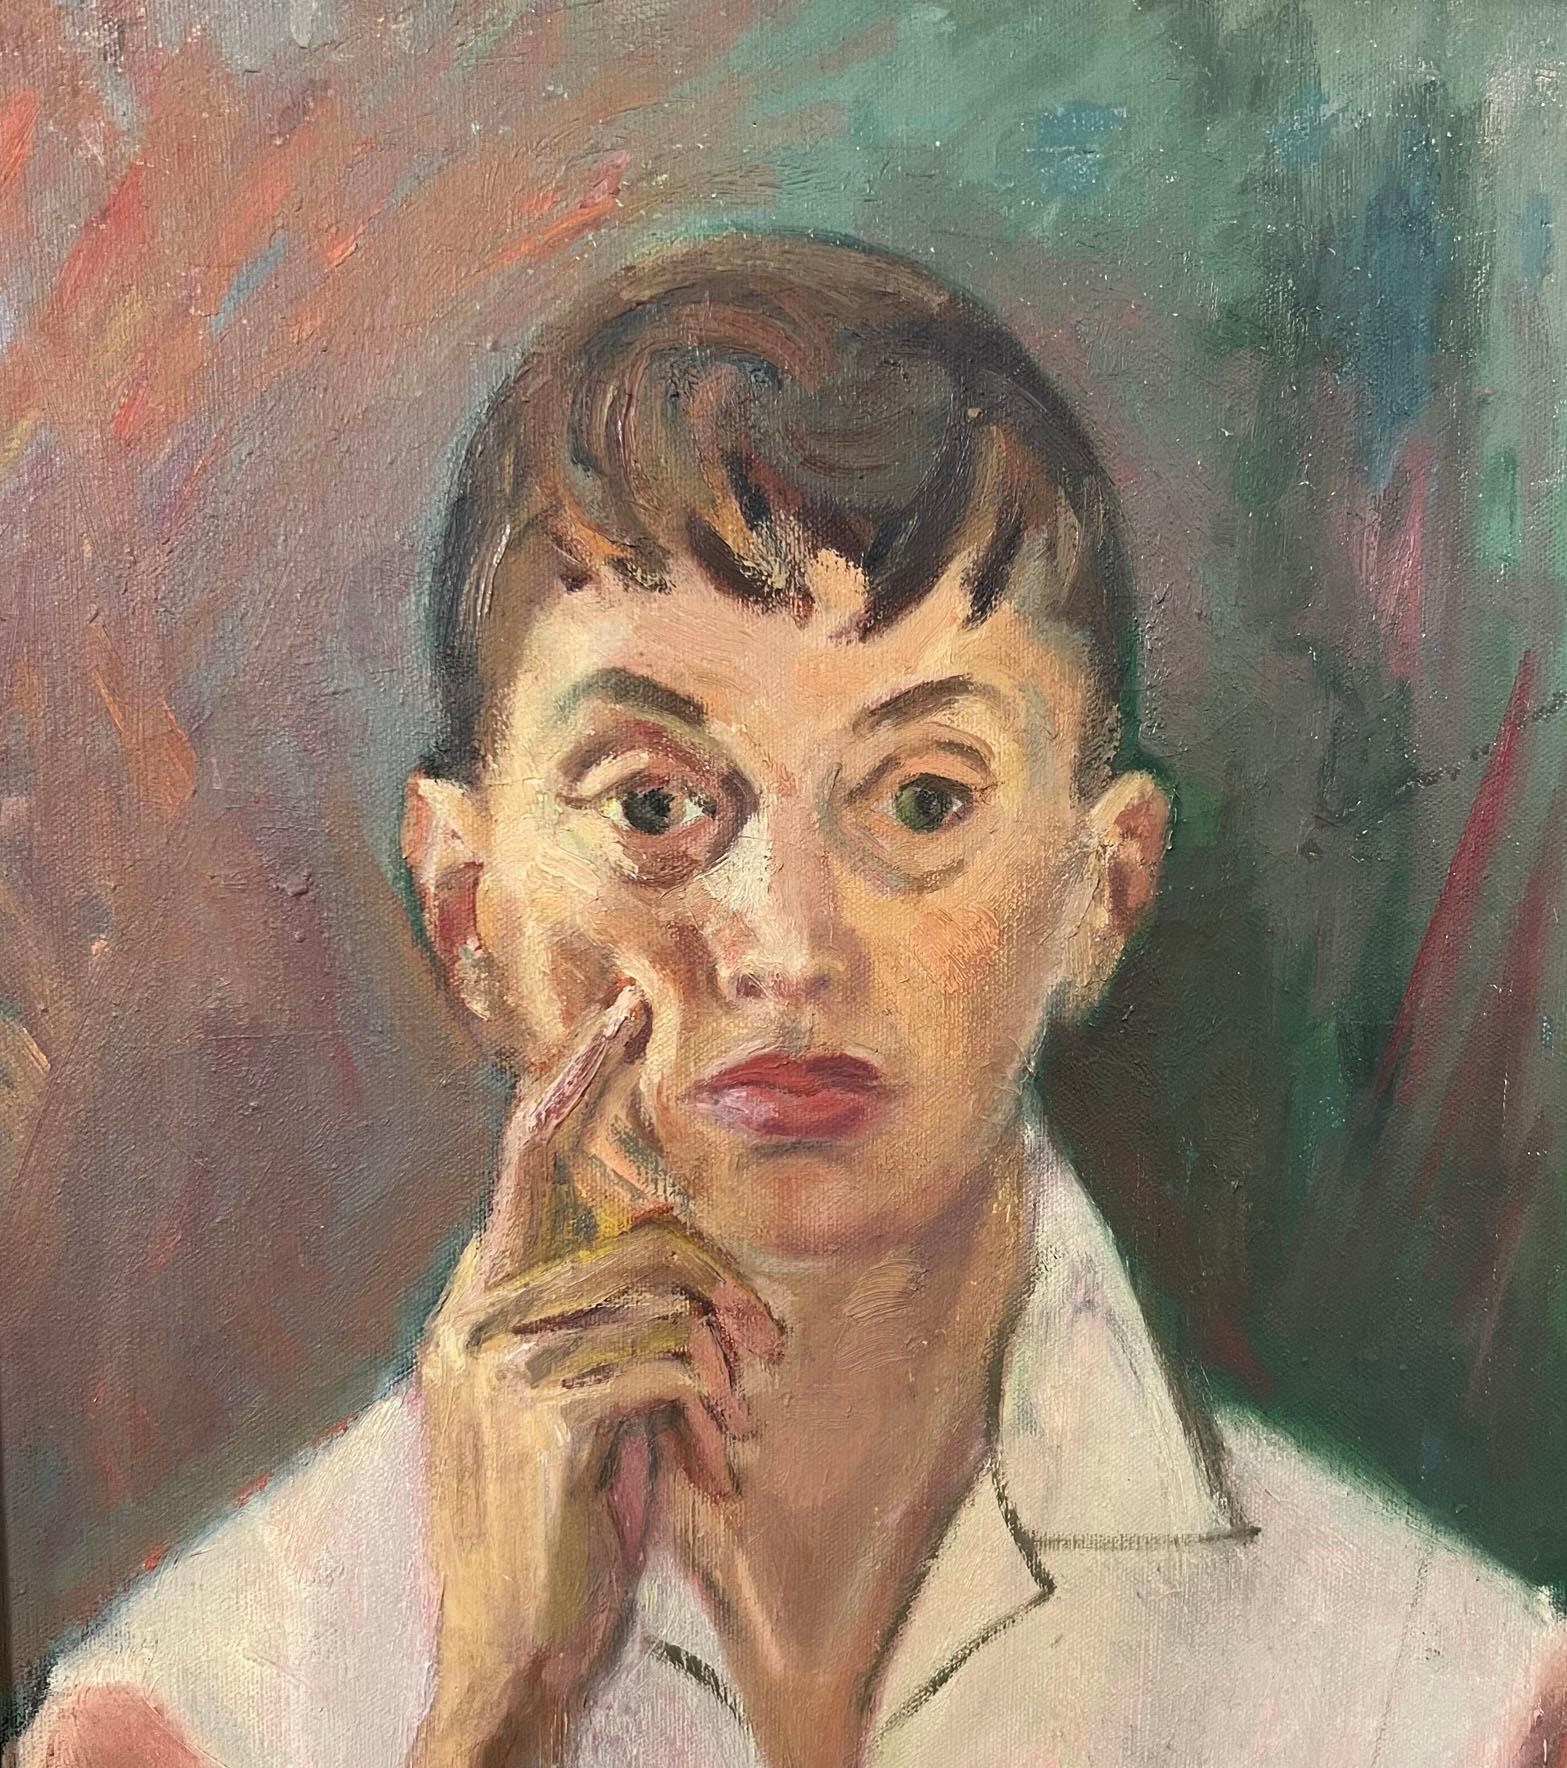 An early 1950s oil self portrait of the important American art collector Anita Kahn. Anita and her husband Arthur together amassed one of the most important collections of postwar American art in the United States. Anita had been an art student at